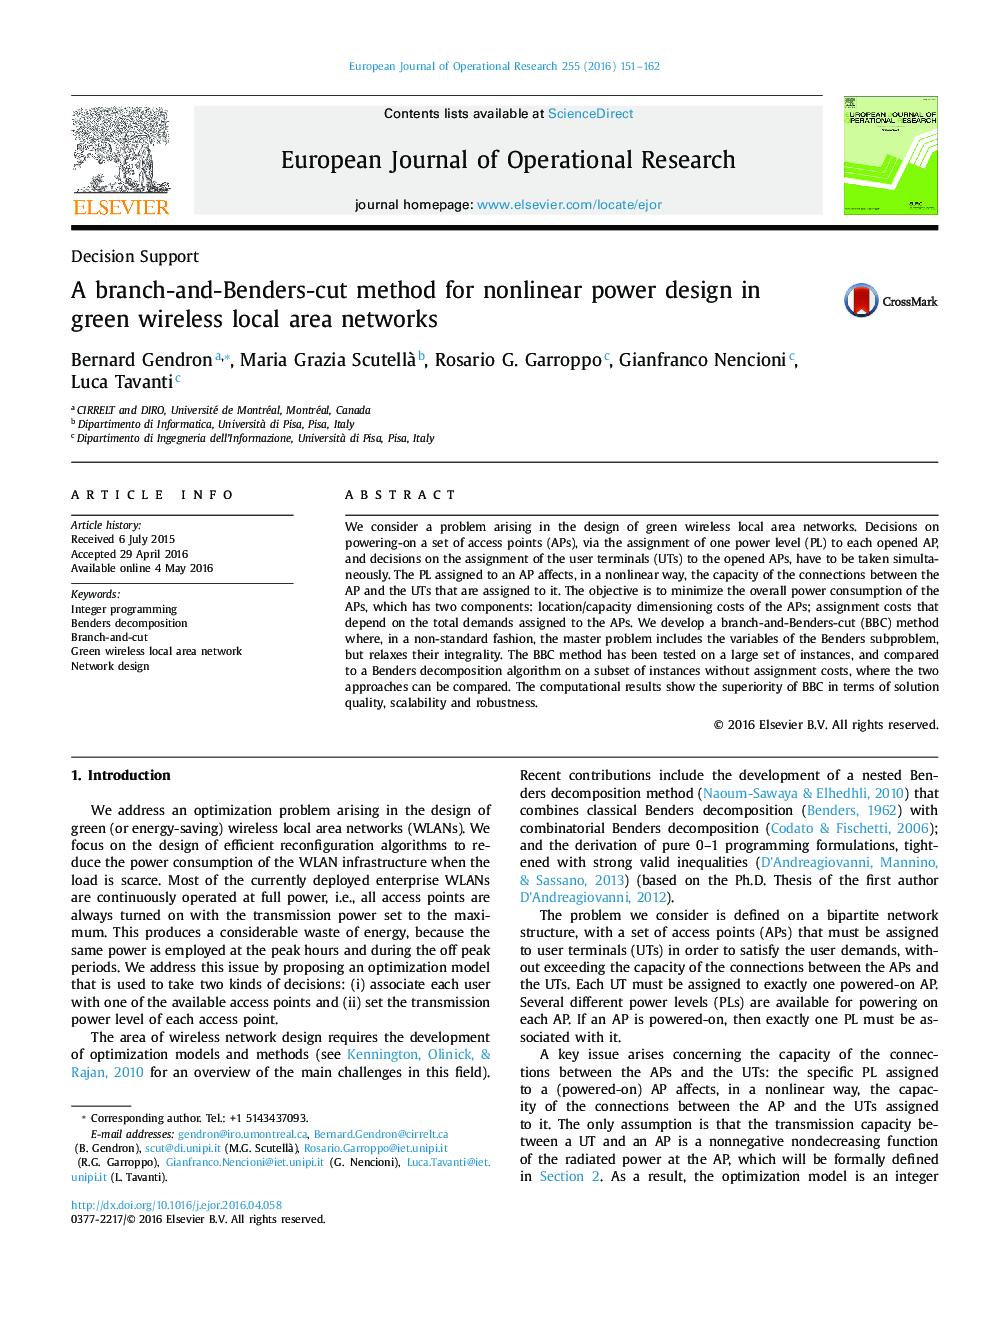 A branch-and-Benders-cut method for nonlinear power design in green wireless local area networks